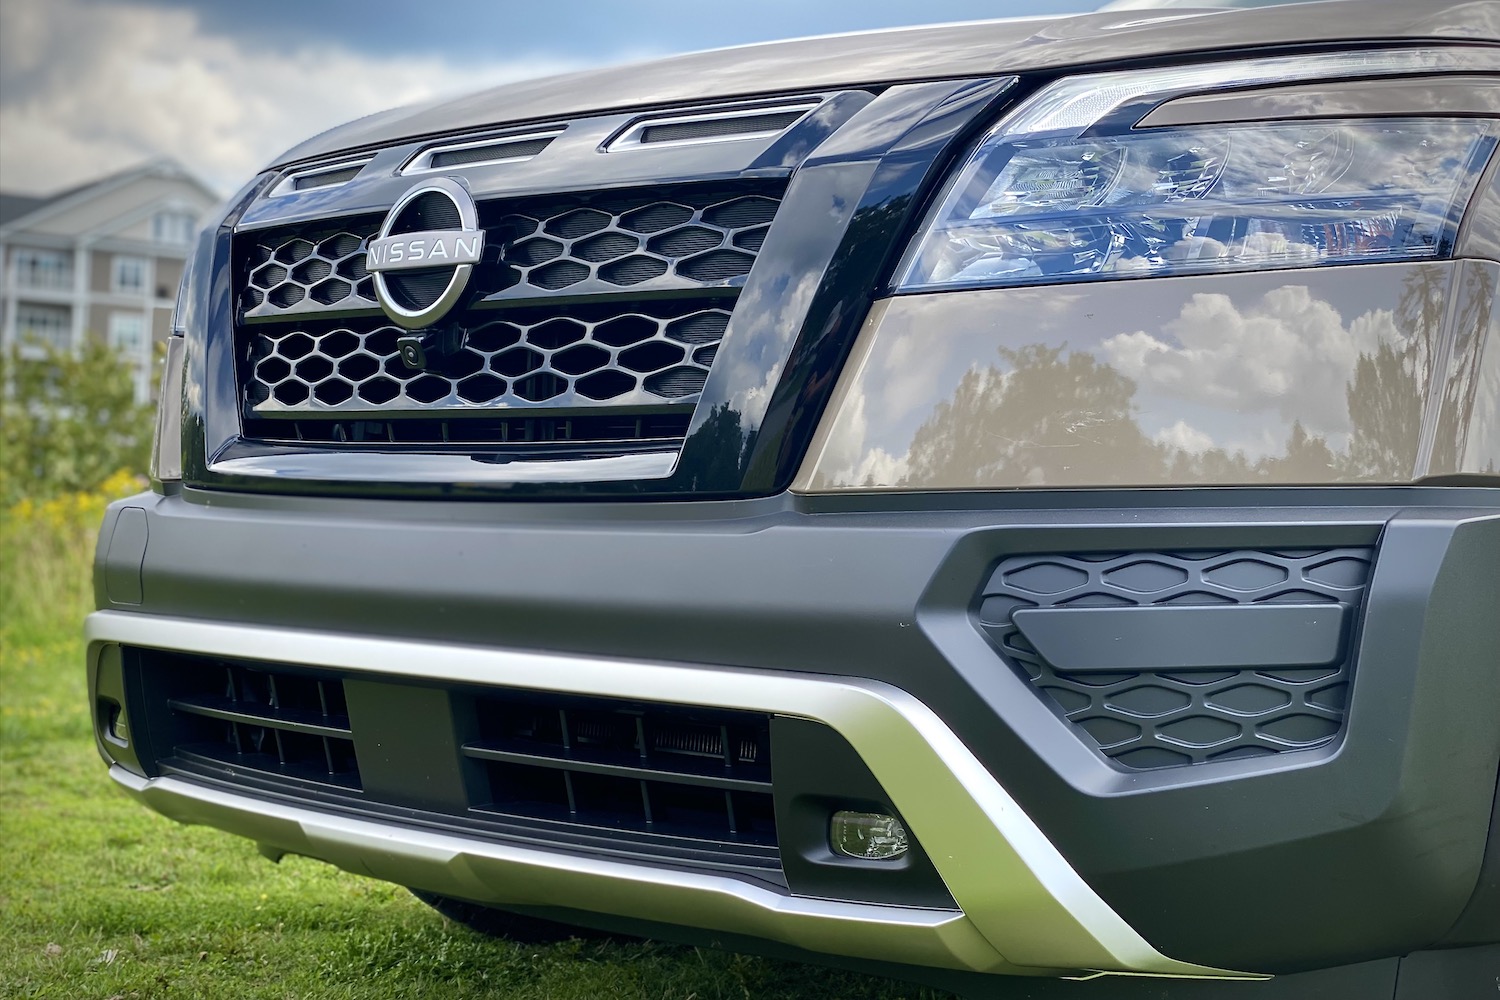 Close up of 2023 Nissan Pathfinder Rock Creek front grille and headlight on a grassy field with a hotel in the back.